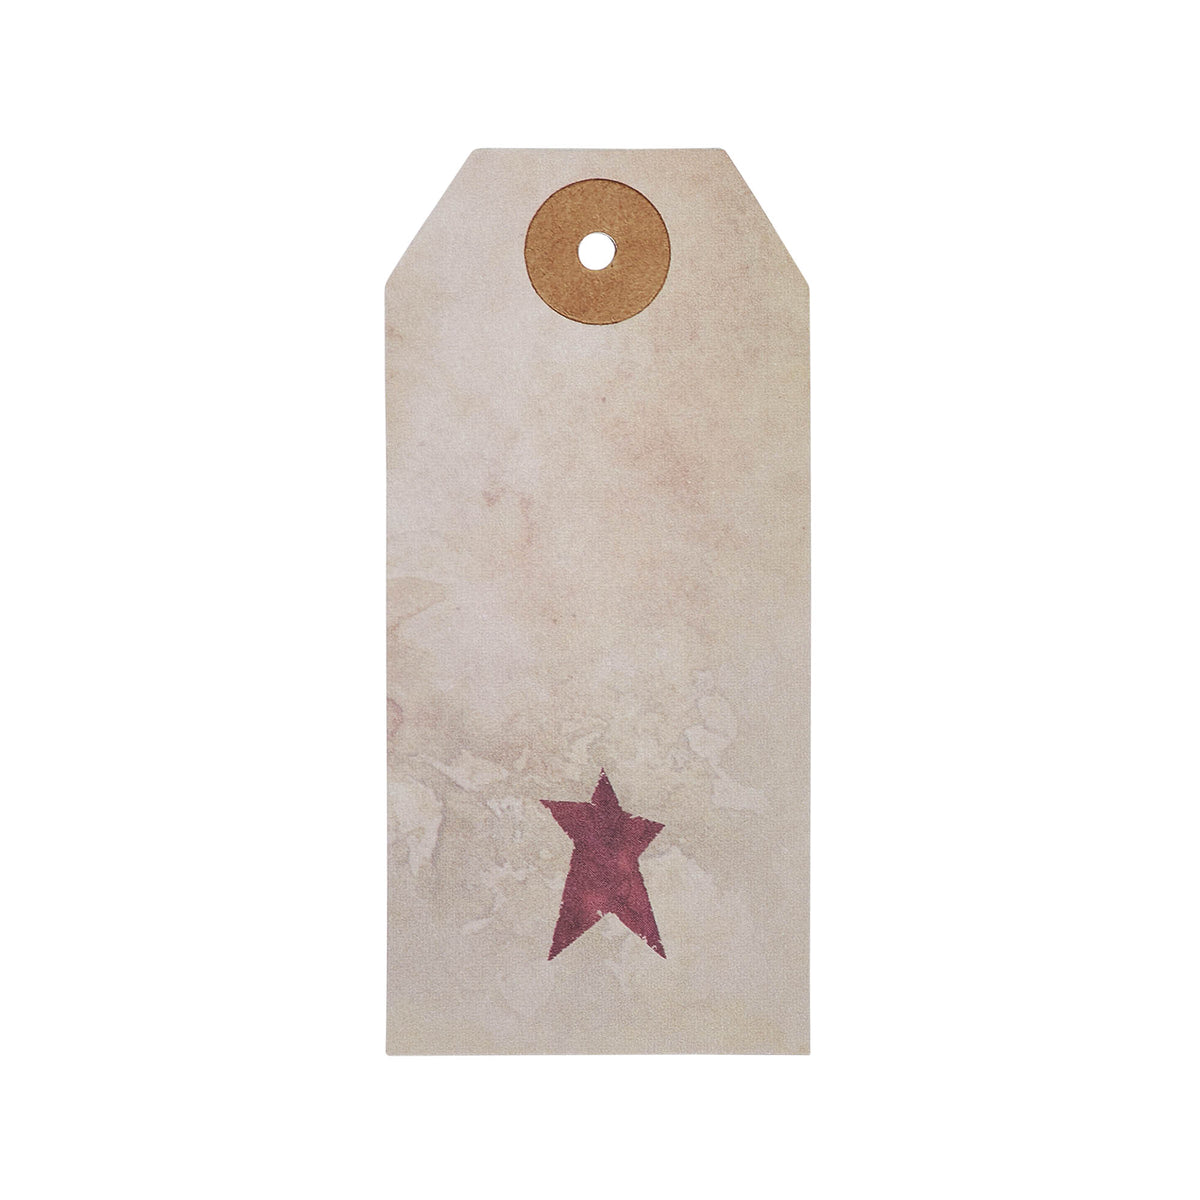 Primitive Star Tea Stained Paper Tag Burgundy 3.75x1.75 w/ Twine Set of 50